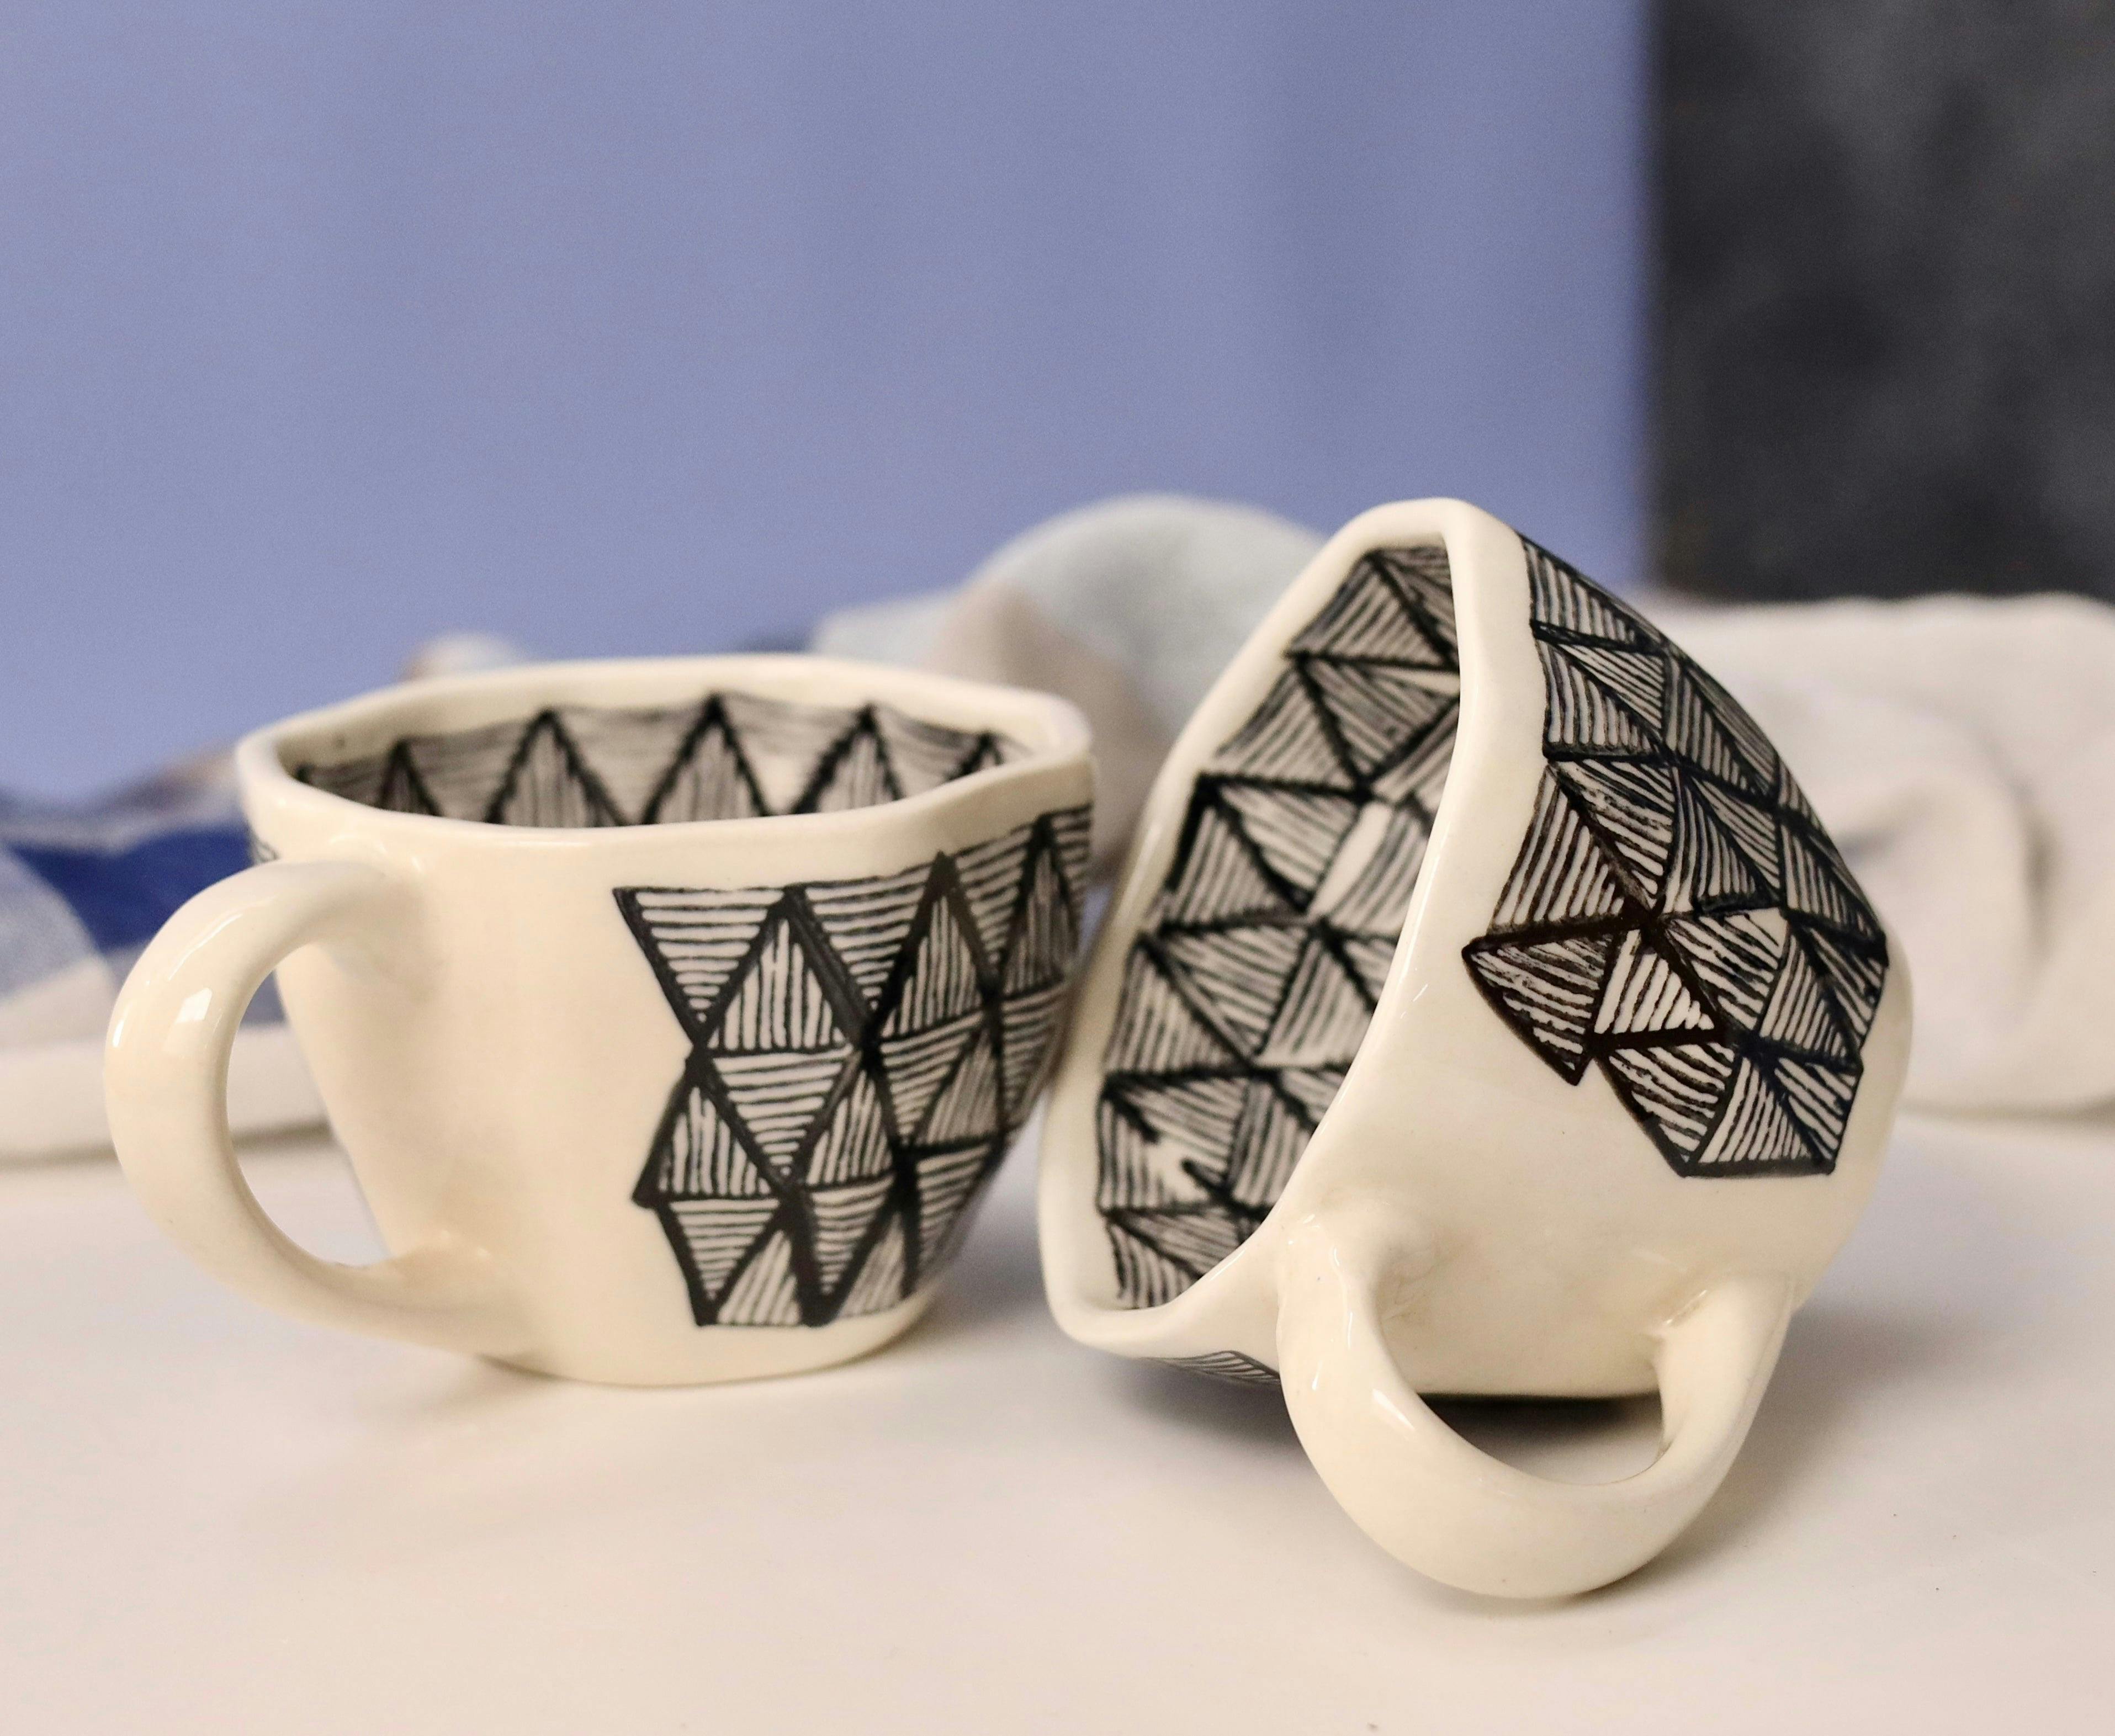 Spaced Out Handmade Mug, a product by Olive Home accent